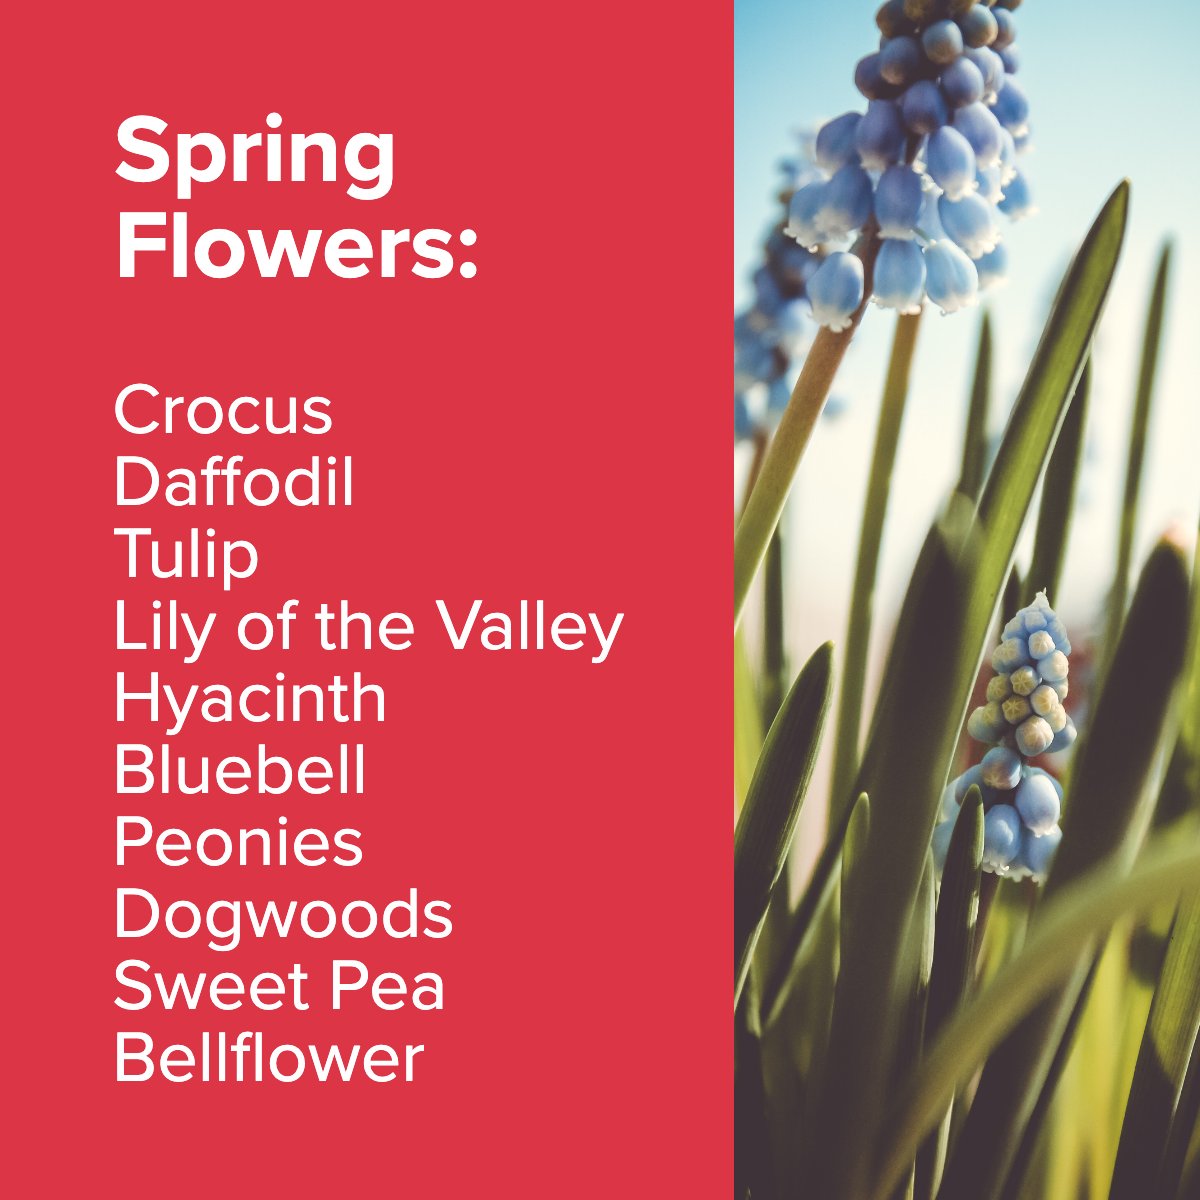 Welcome spring with a garden full of blossoms! Perfect to boost curb appeal if you're selling, or add joy to your new home if you're buying. 🏡🌼 #springflowers  #lovespringflowers  #springflowersblooming
#BeyondRealtor #ExpertHomeFinder